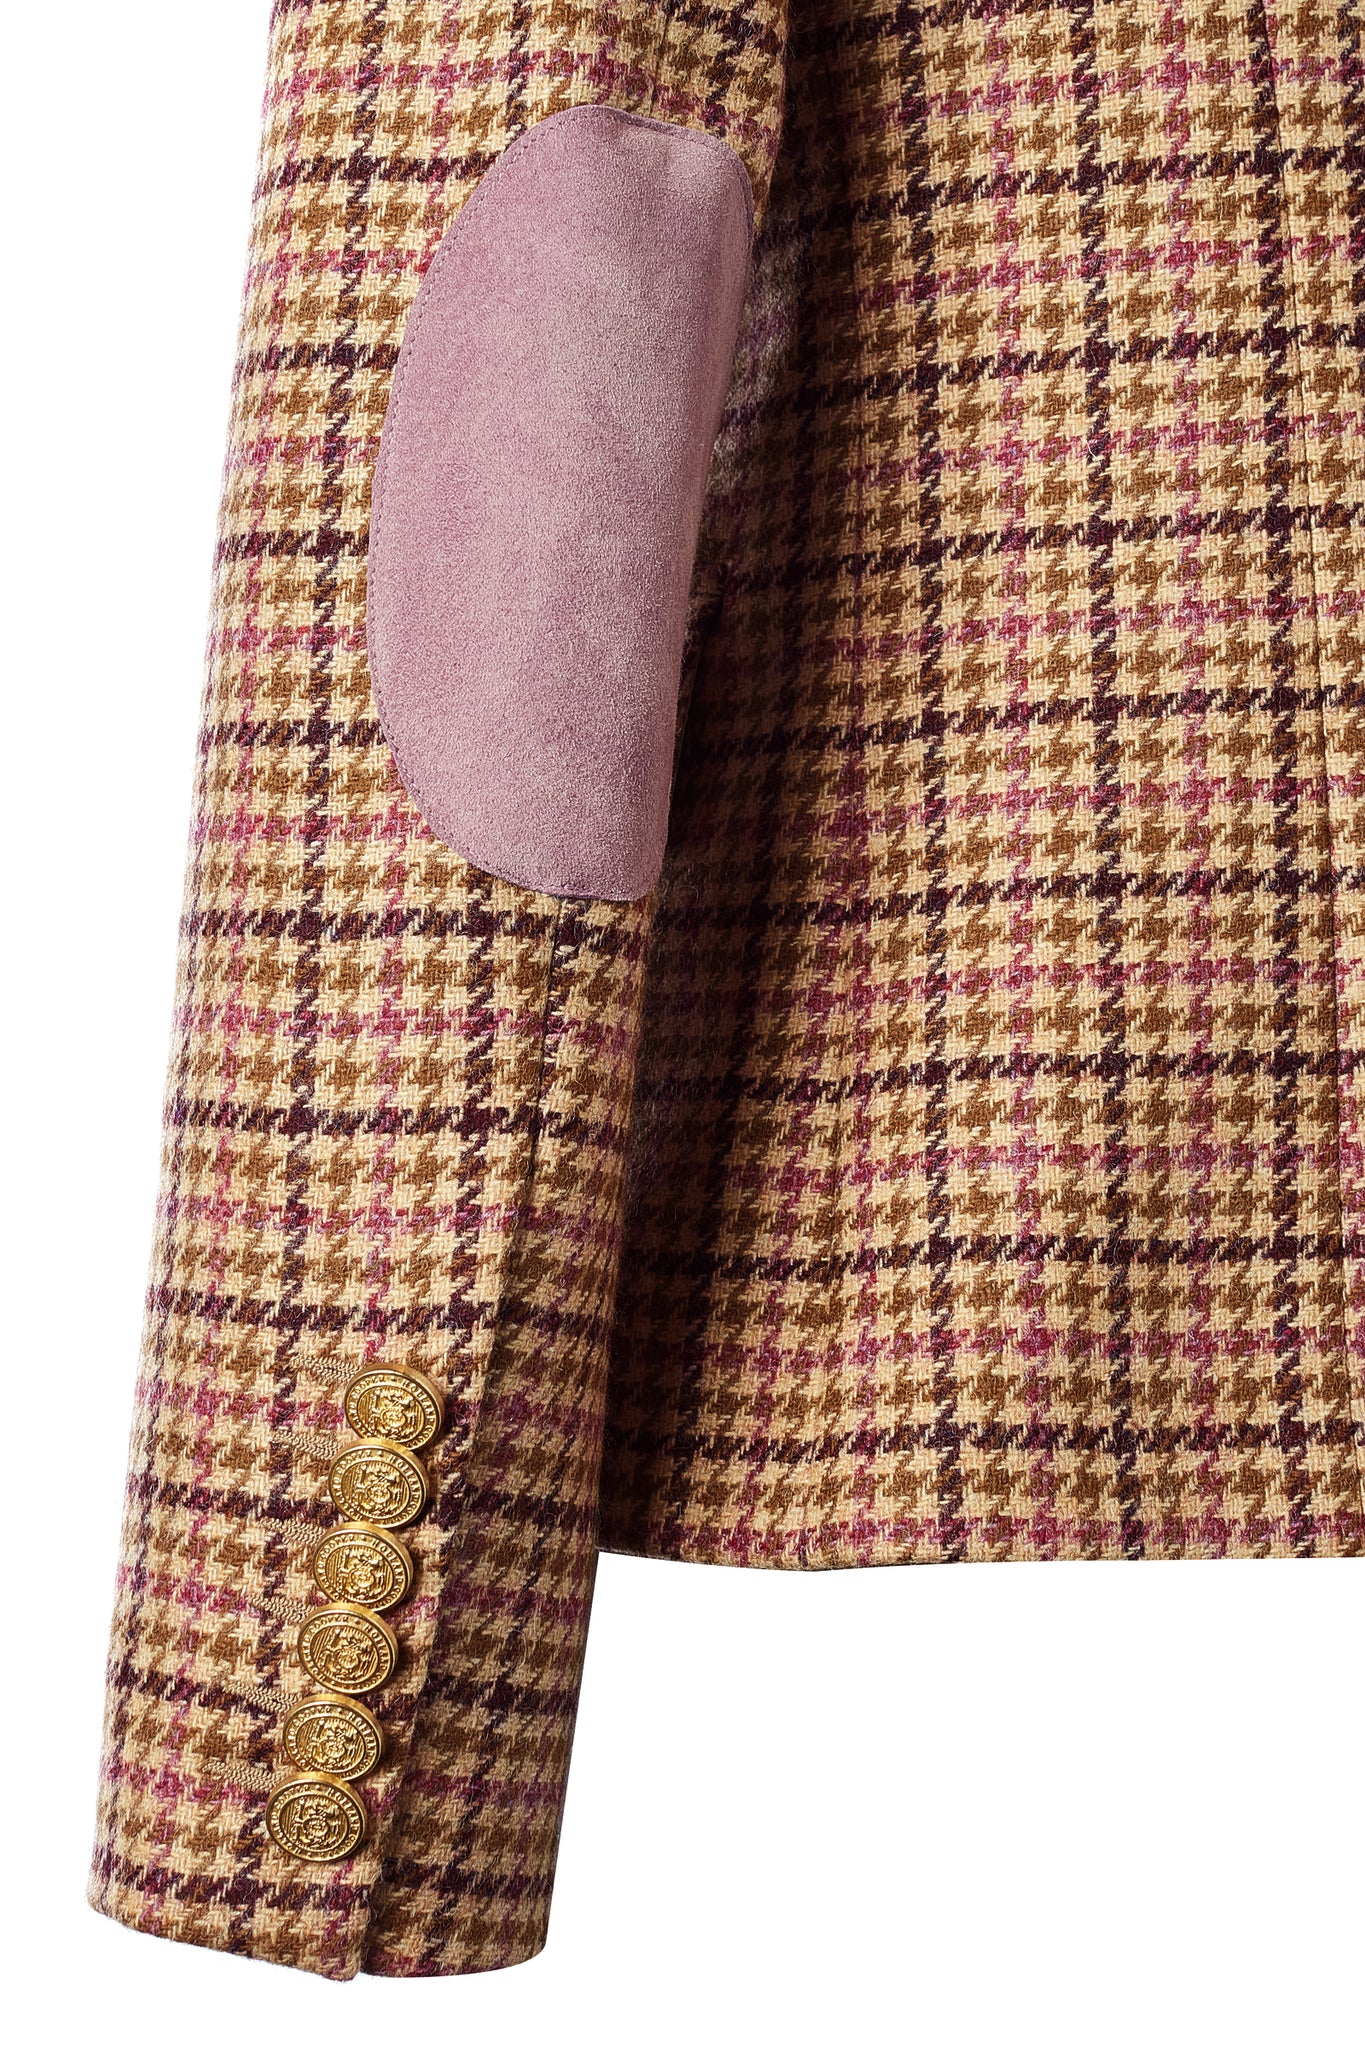 pink suede elbow patch and gold button detail on cuffs of British made double breasted blazer that fastens with a single button hole to create a more form fitting silhouette with two pockets and gold button detailing this blazer is made from pink purple and brown check houndstooth fabric